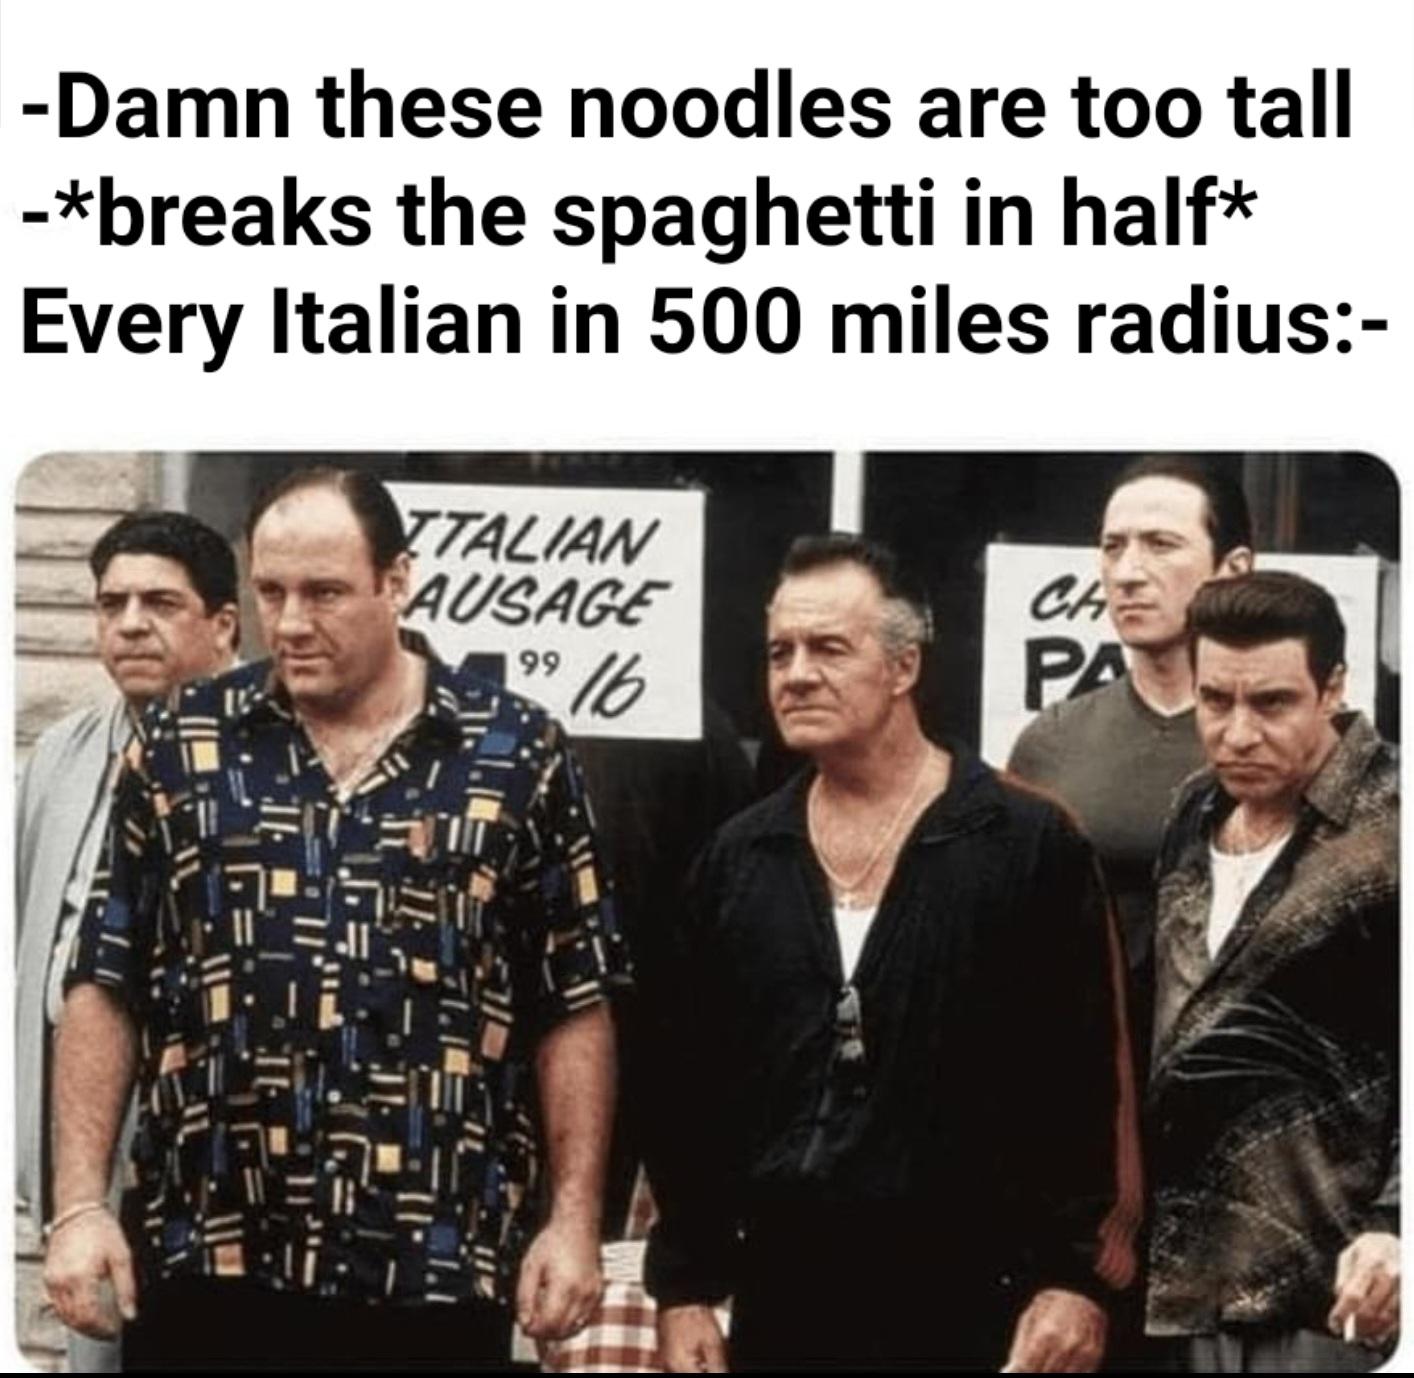 dank memes and pics -  sopranos mobsters - Damn these noodles are too tall breaks the spaghetti in half Every Italian in 500 miles radius Italian Ausage 99 1 16 Ch Pa